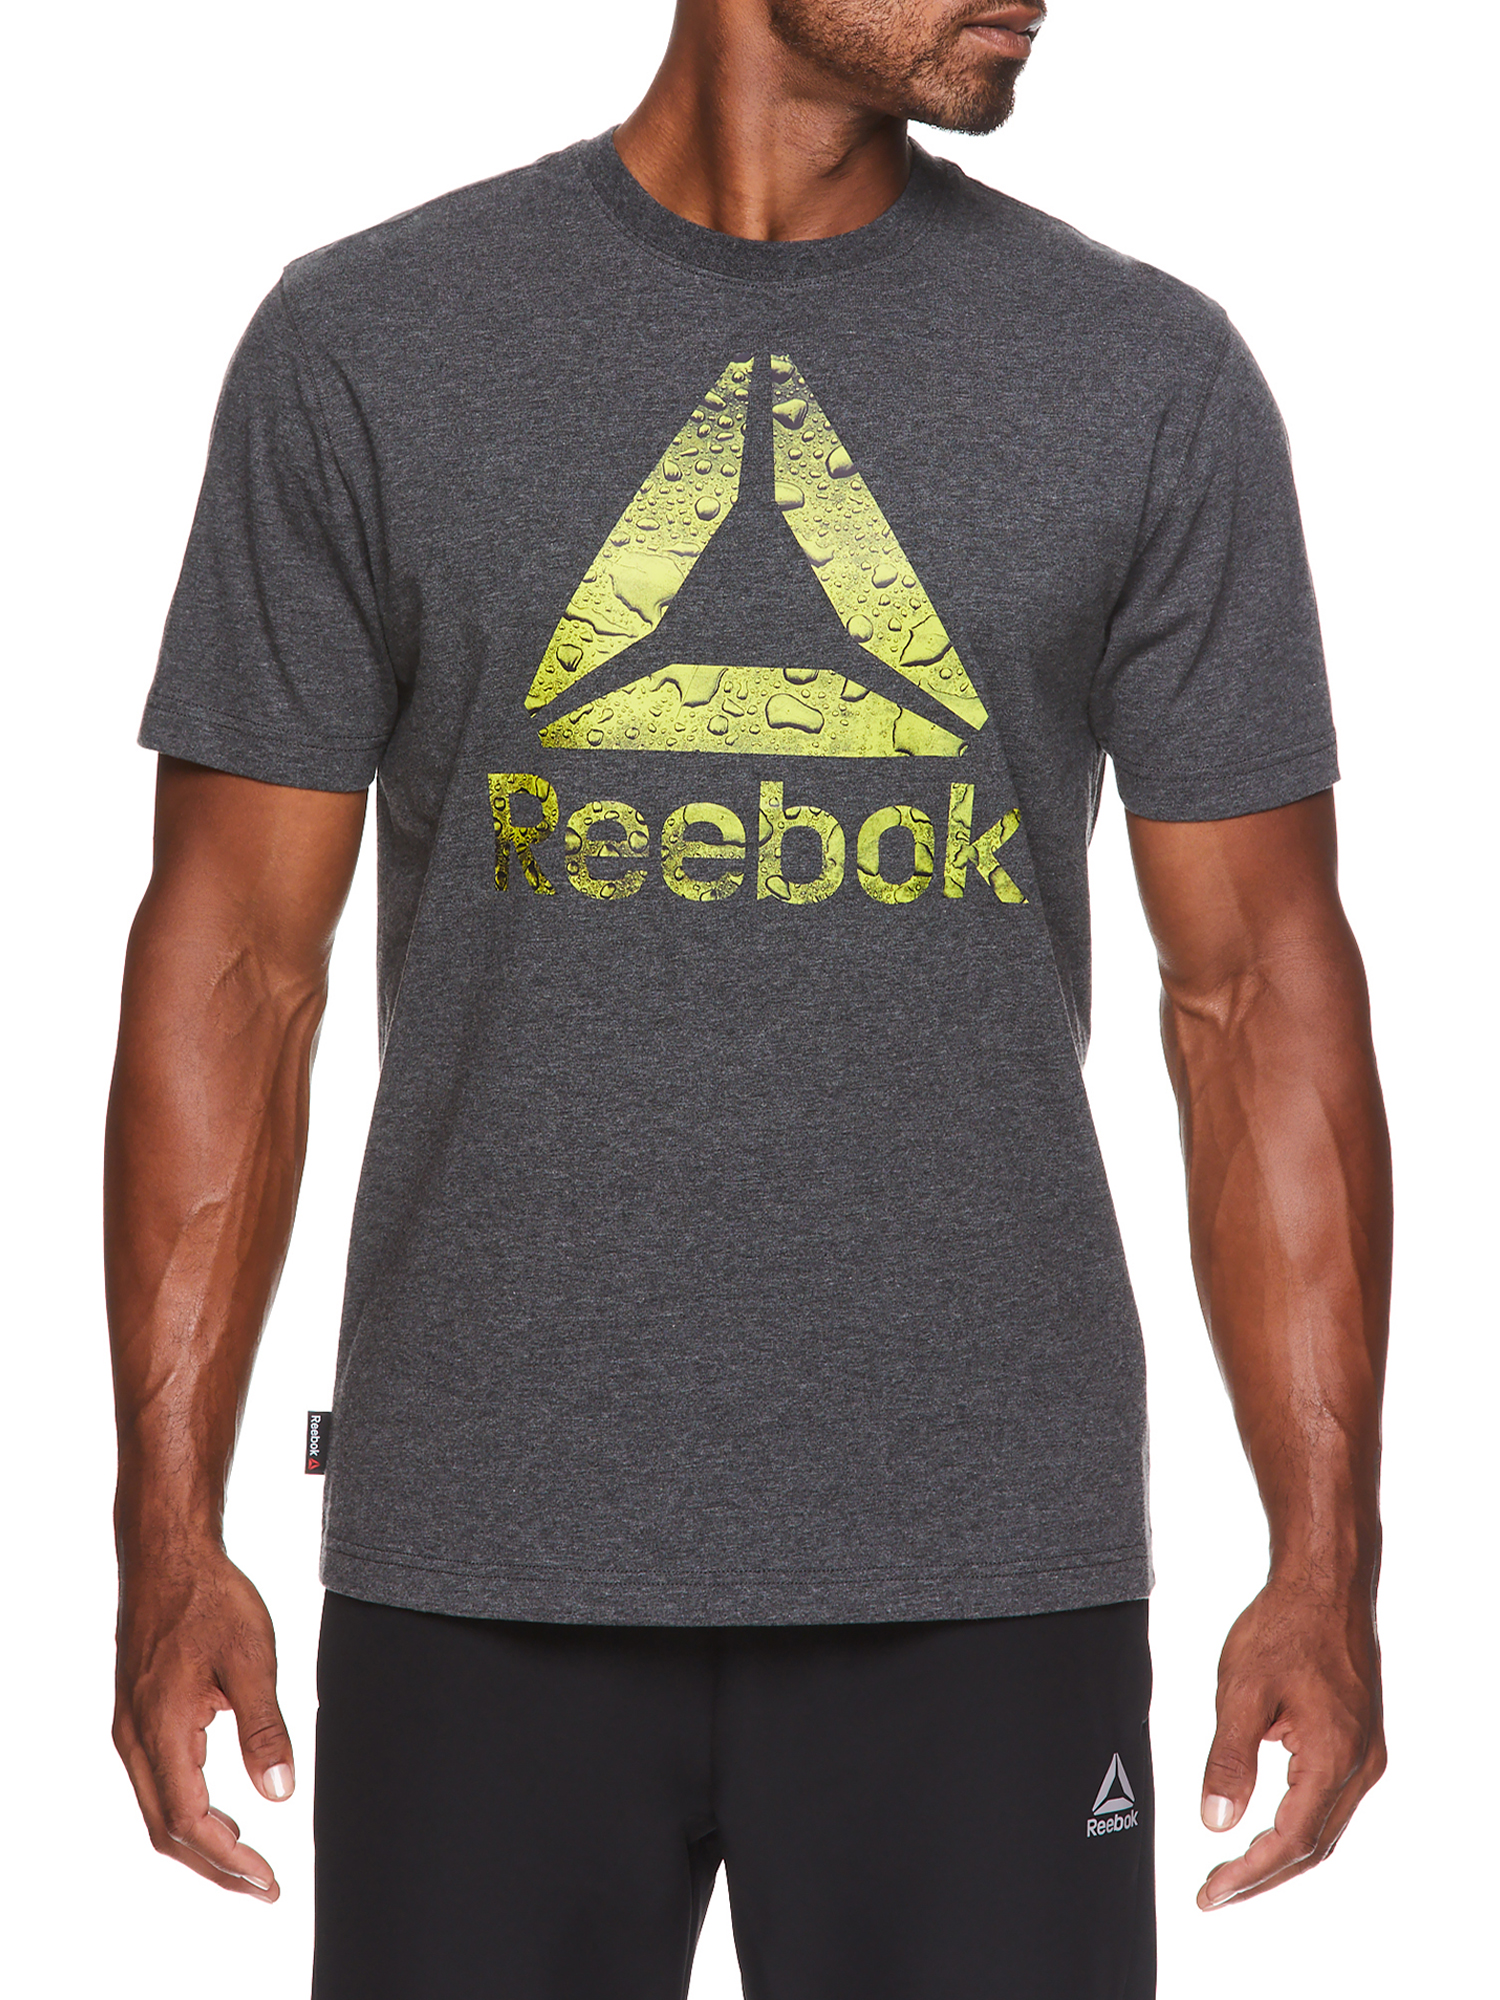 Reebok Men's and Big Men's Active Hiit Graphic Training Tee, up to Size 3XL - image 1 of 4